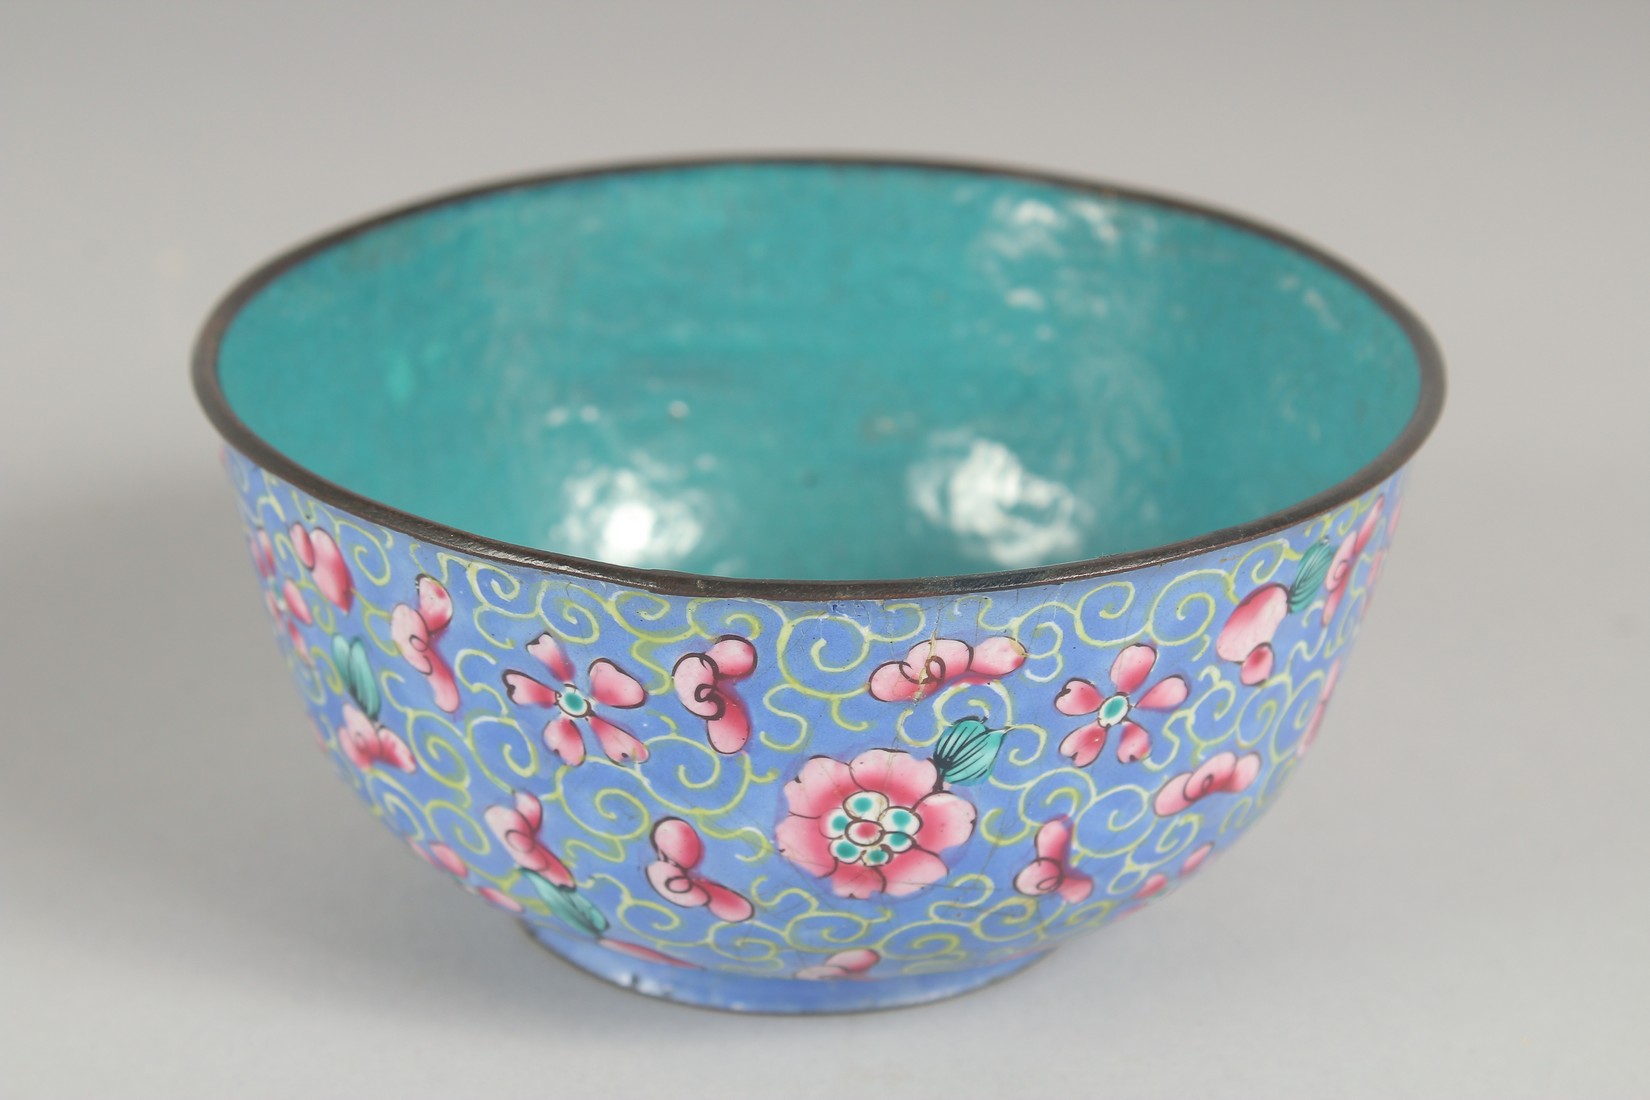 A CHINESE CANTON FAMILLE ROSE ENAMEL BOWL, the exterior with foliate decoration, 11.5cm diameter. - Image 3 of 5